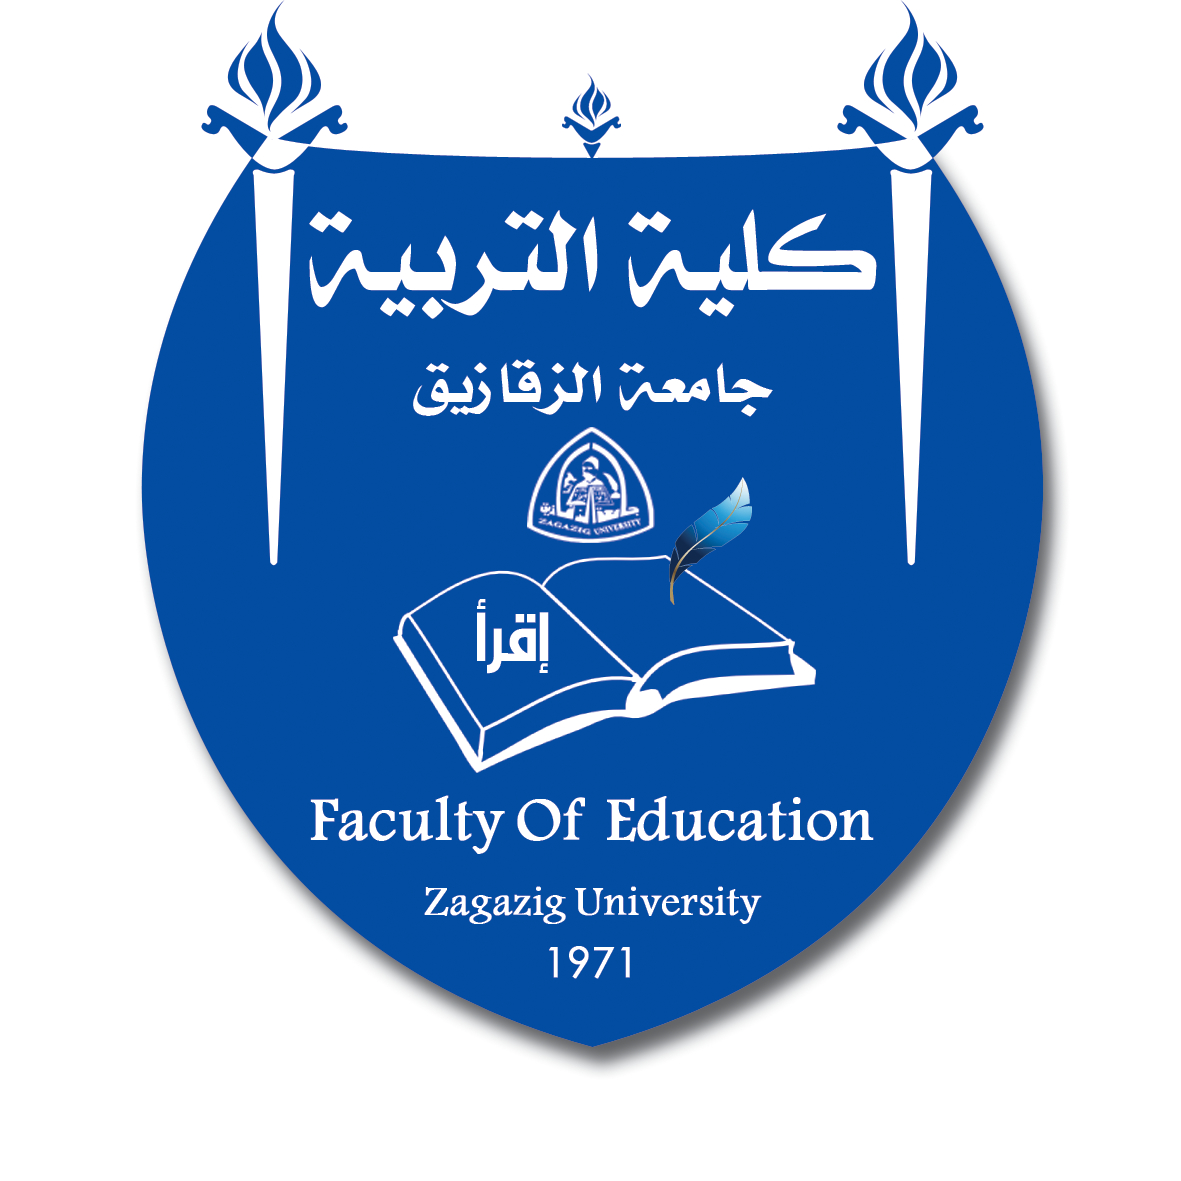 Study plans of the second semester of the academic year 2012/2013 were approved